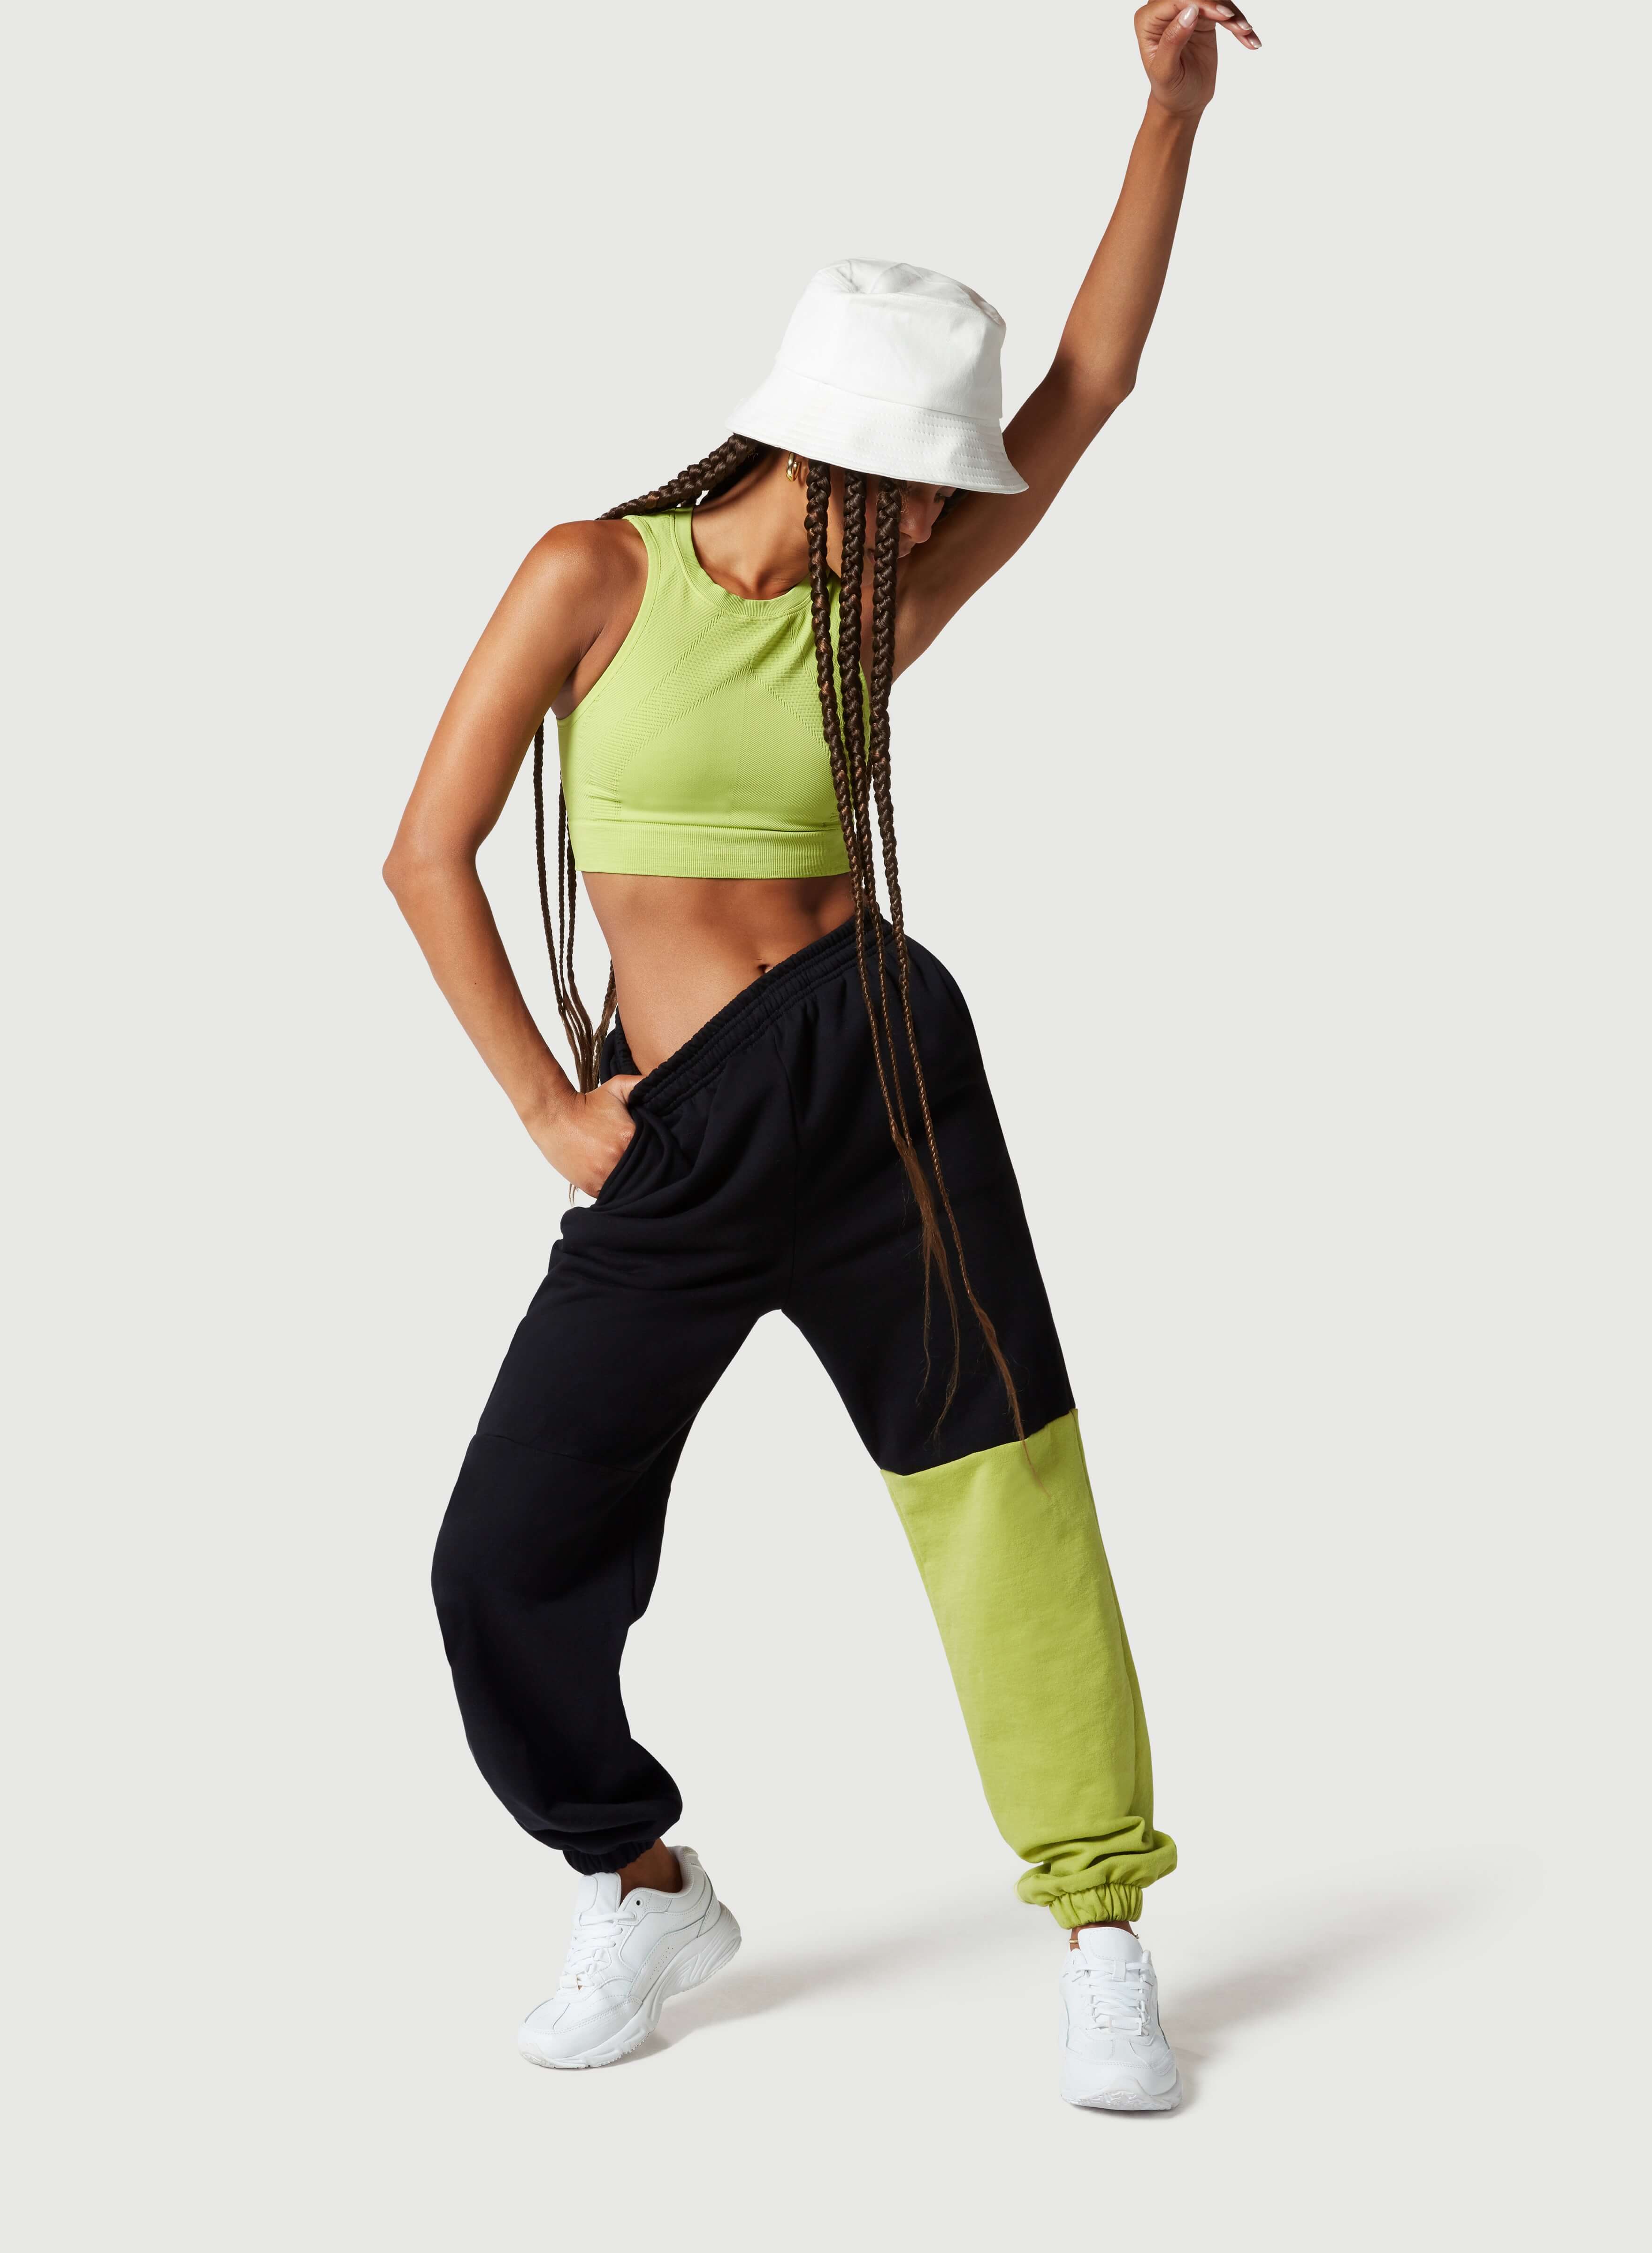 A female model with black trousers, green top and white cap in a dancing position